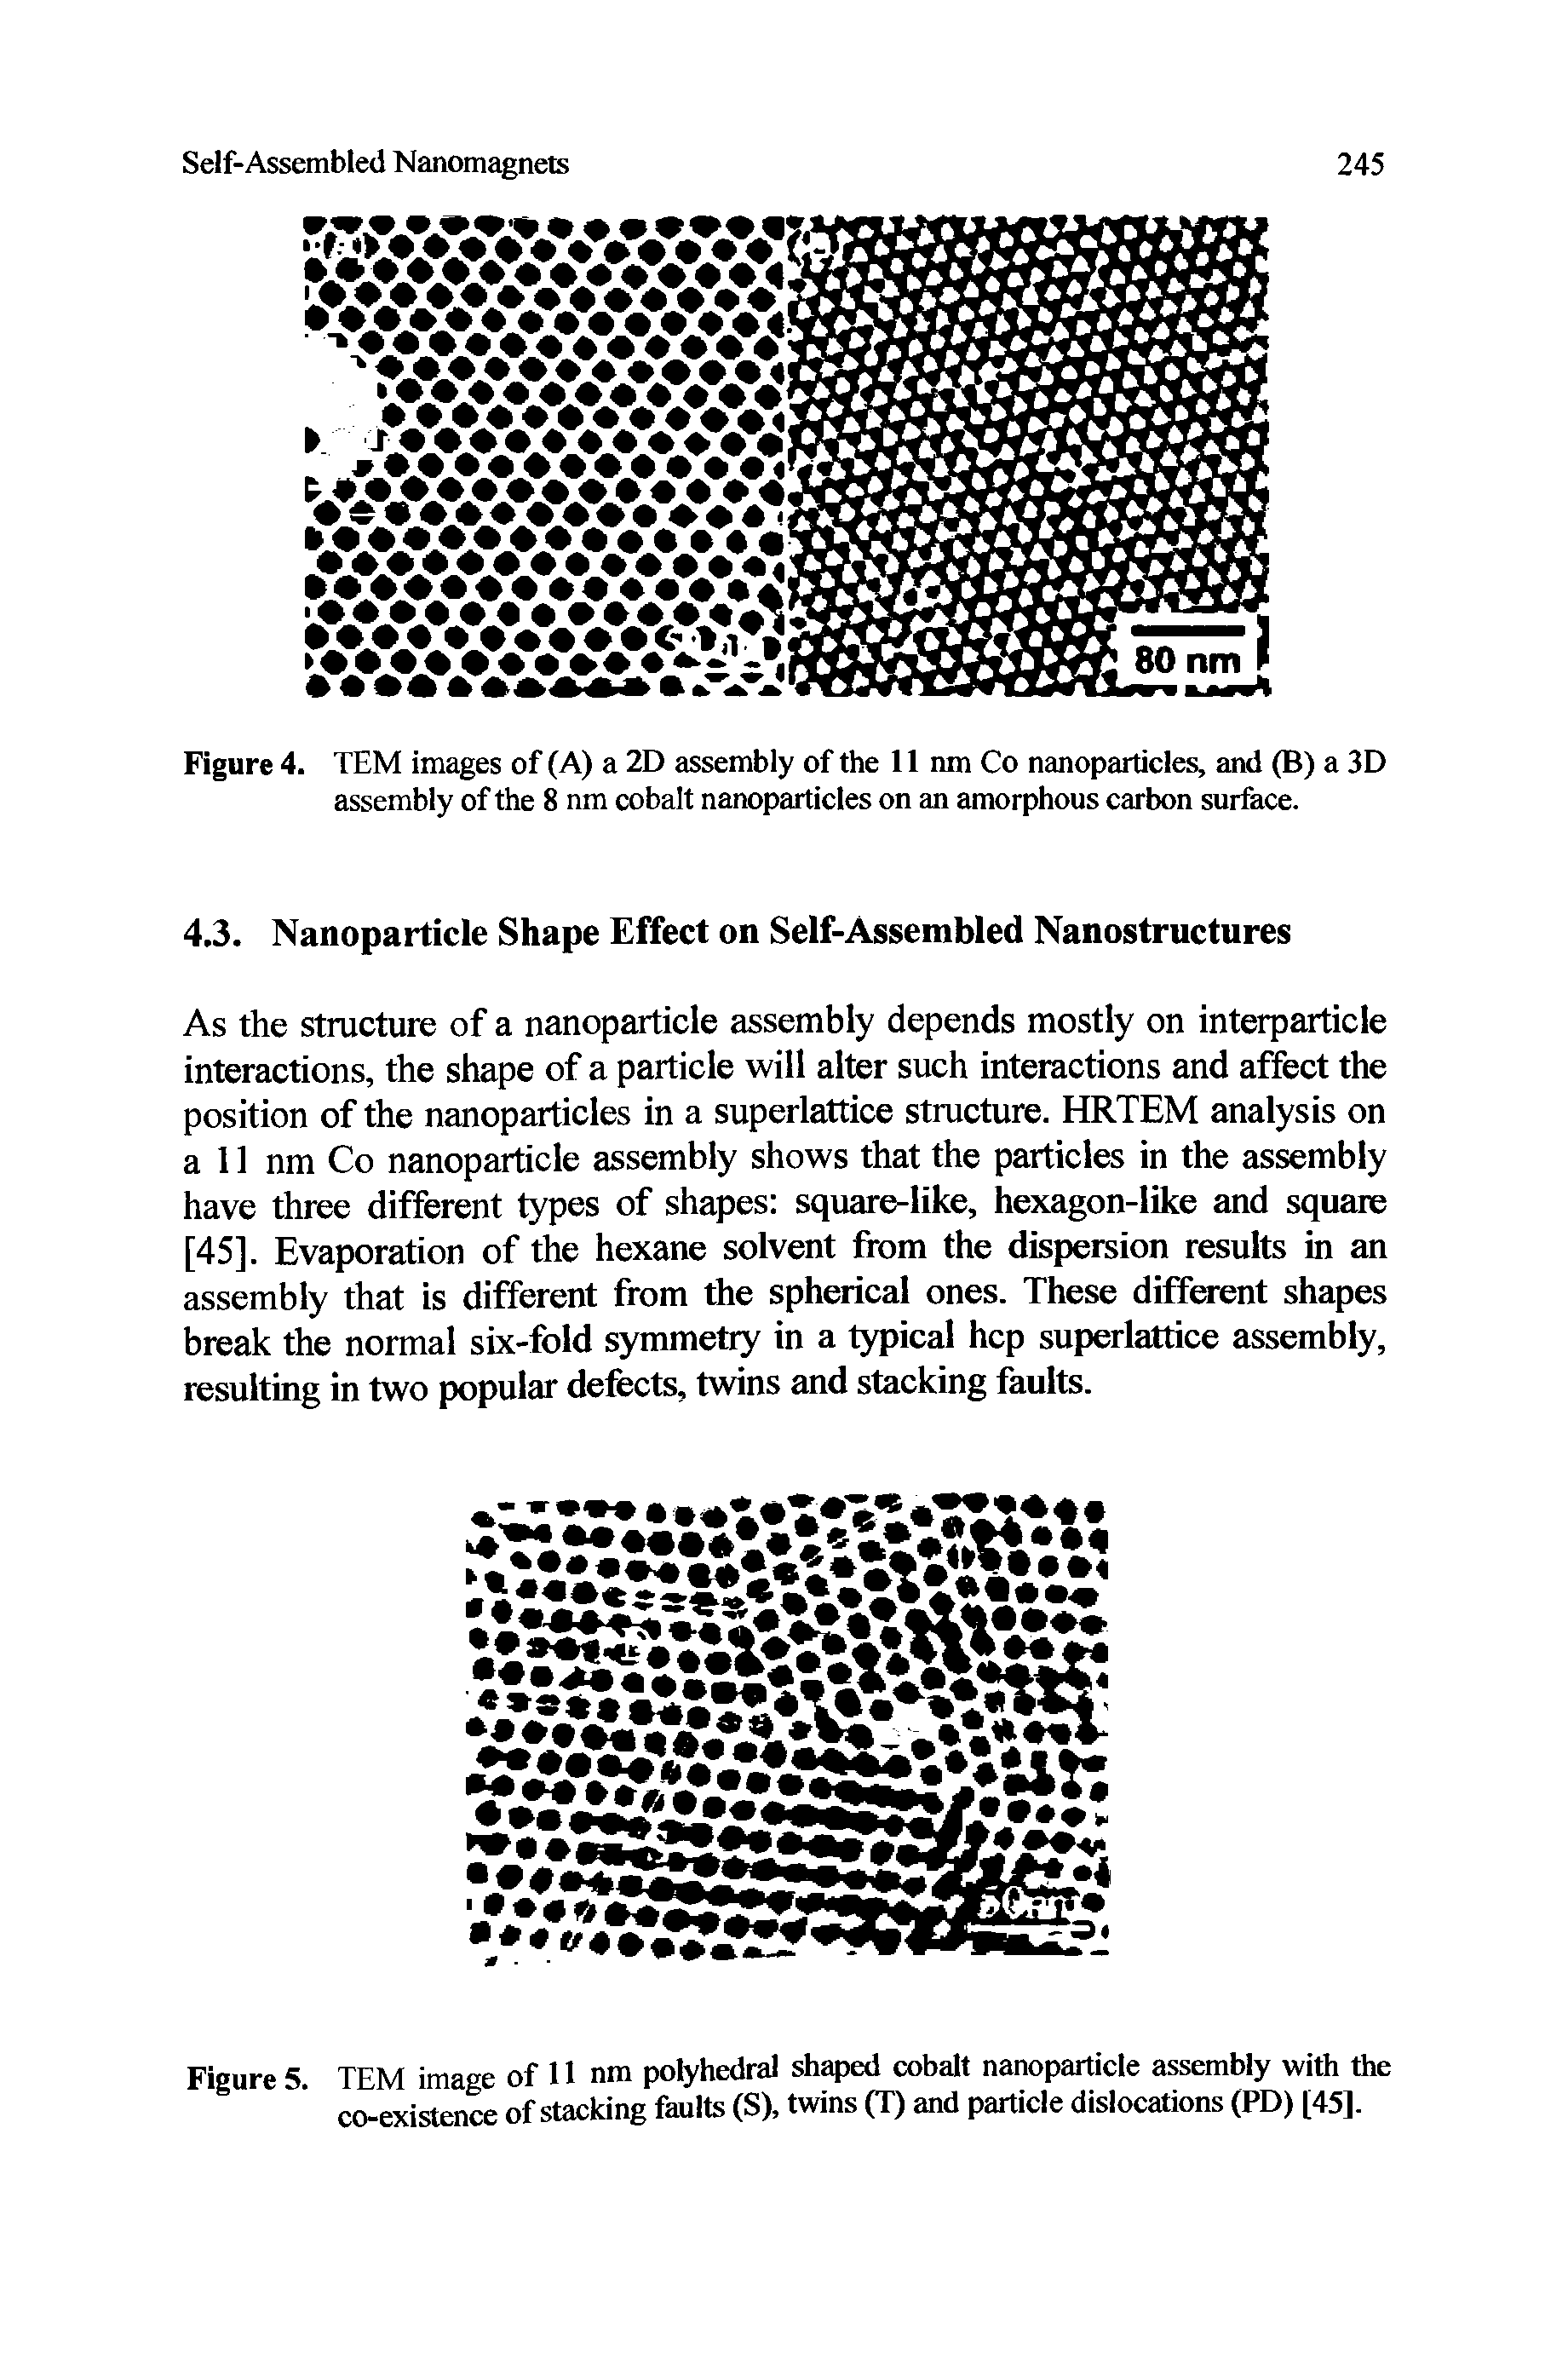 Figure 4. TEM images of (A) a 2D assembly of the 11 nm Co nanoparticles, and (B) a 3D assembly of the 8 nm cobalt nanoparticles on an amorphous carbon surface.